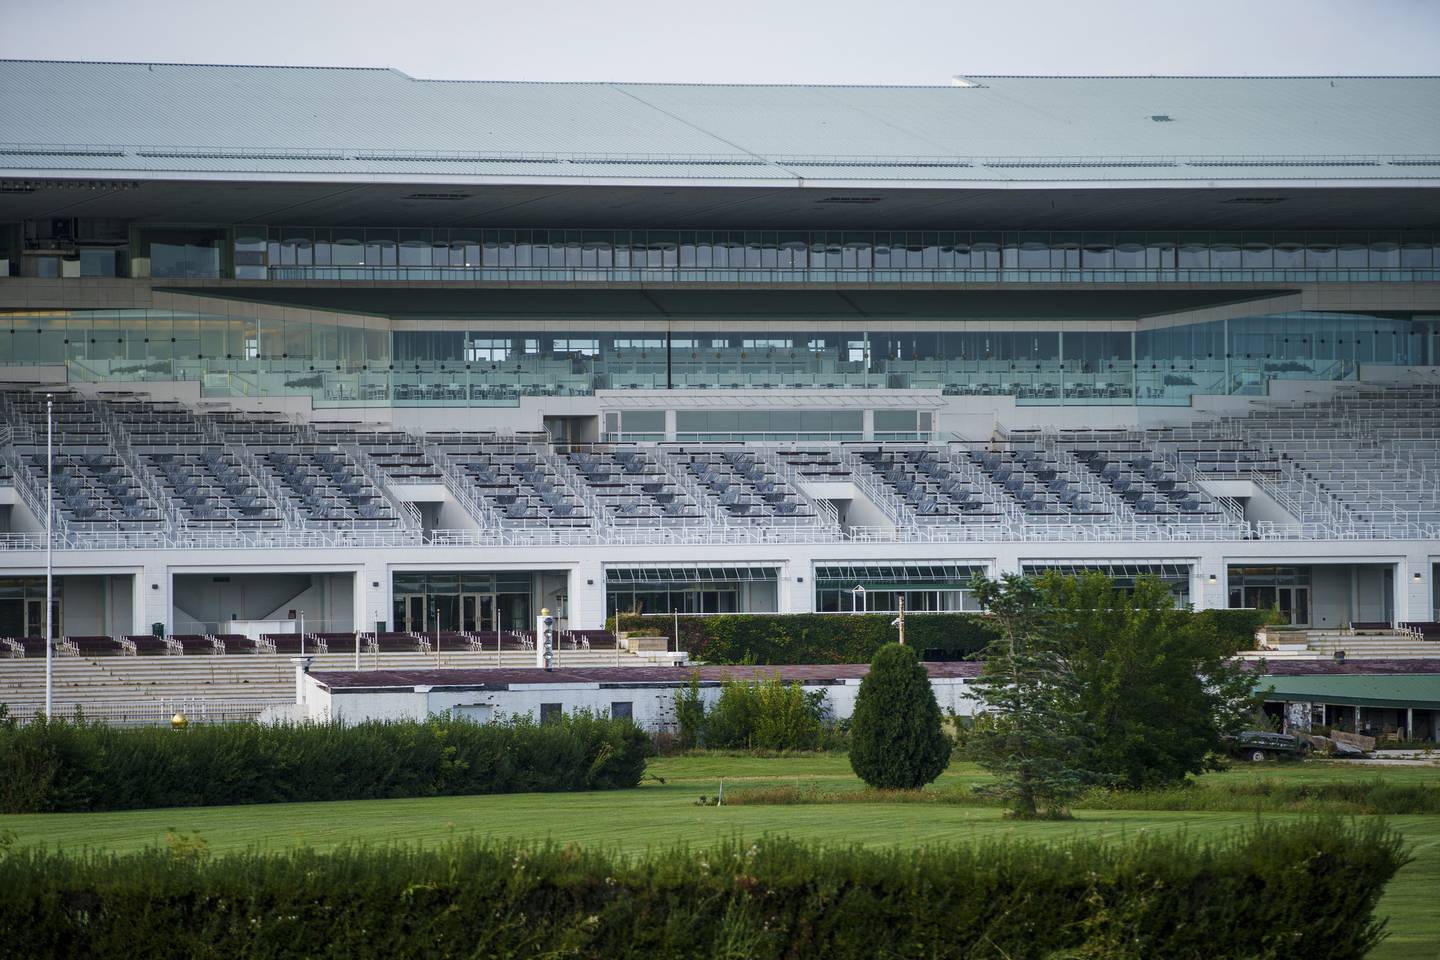 The now-closed Arlington International Racecourse in Arlington Heights is pictured Sept. 6, 2022. The site lies in Palatine School District 15 boundaries and officials there have inquired about how redeveloping the racecourse could financially impact SD15.